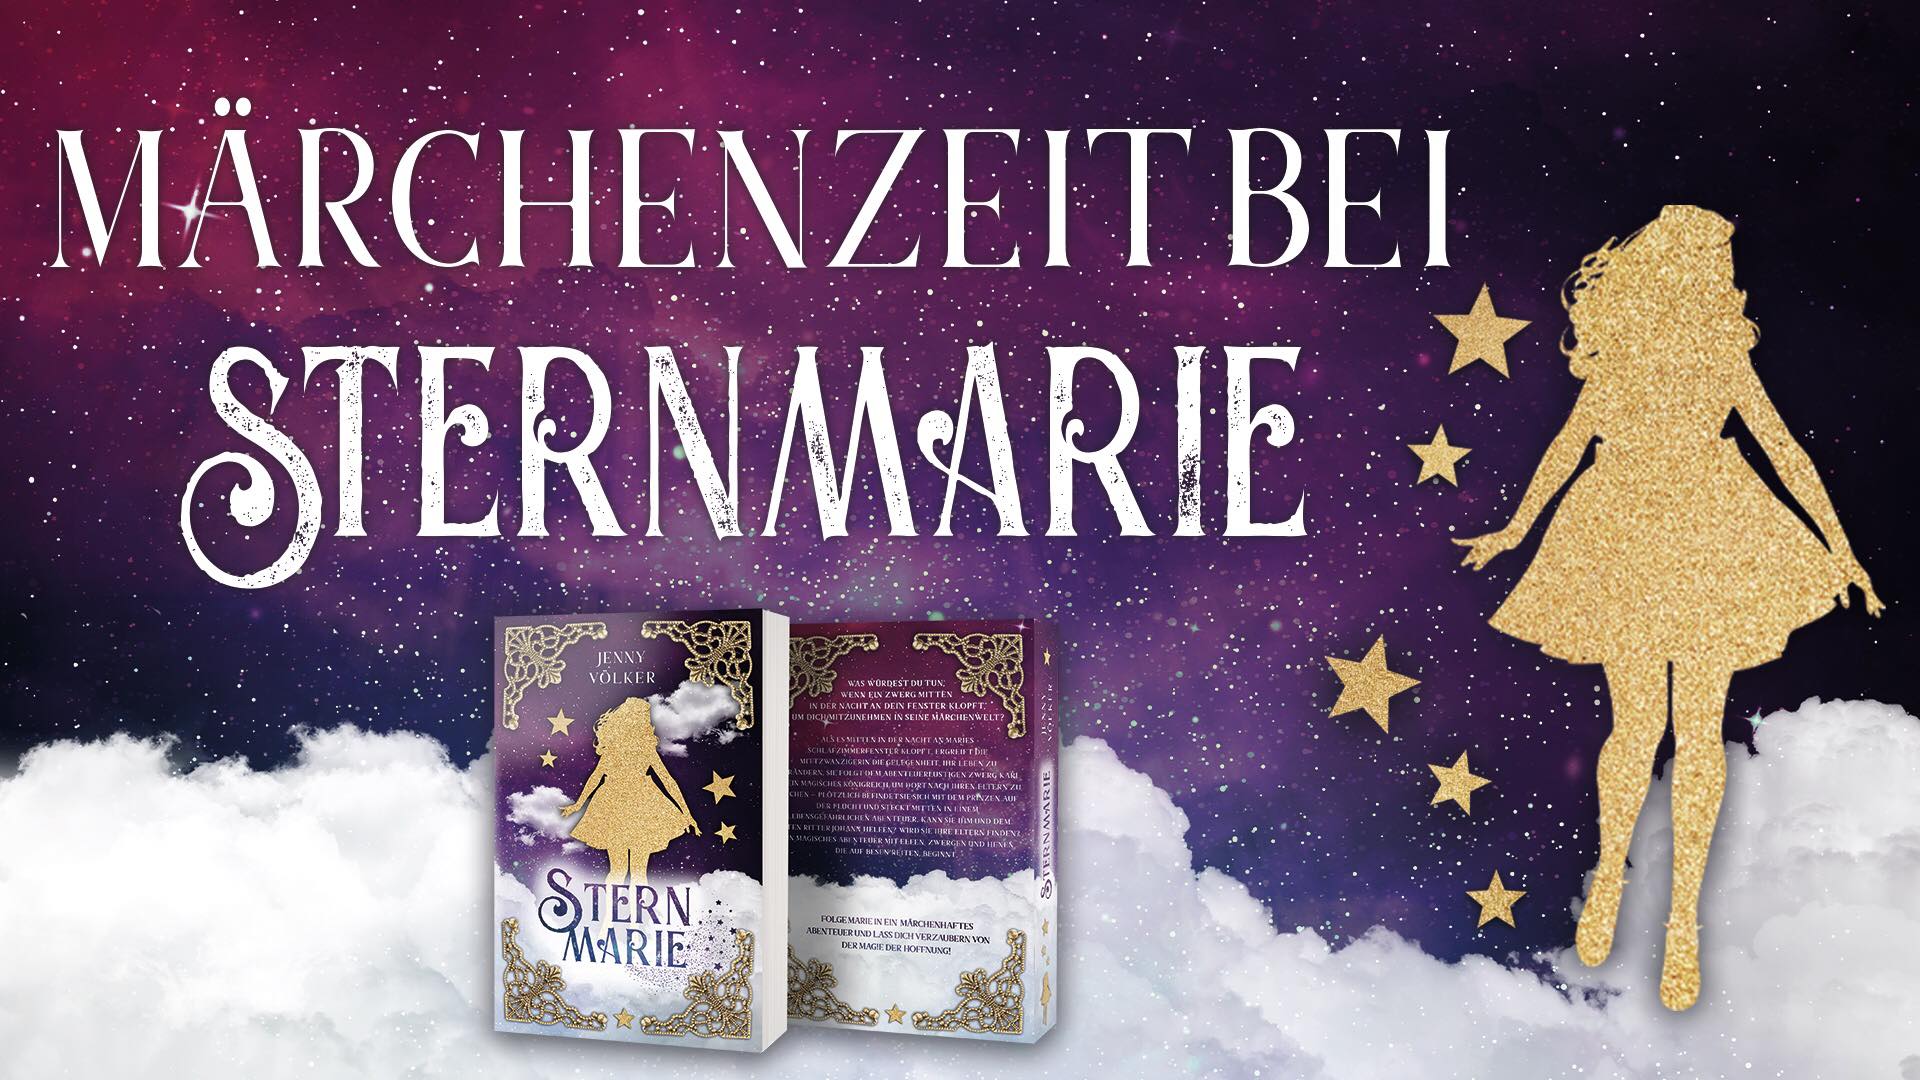 You are currently viewing Märchenzeit bei „Sternmarie“ 02